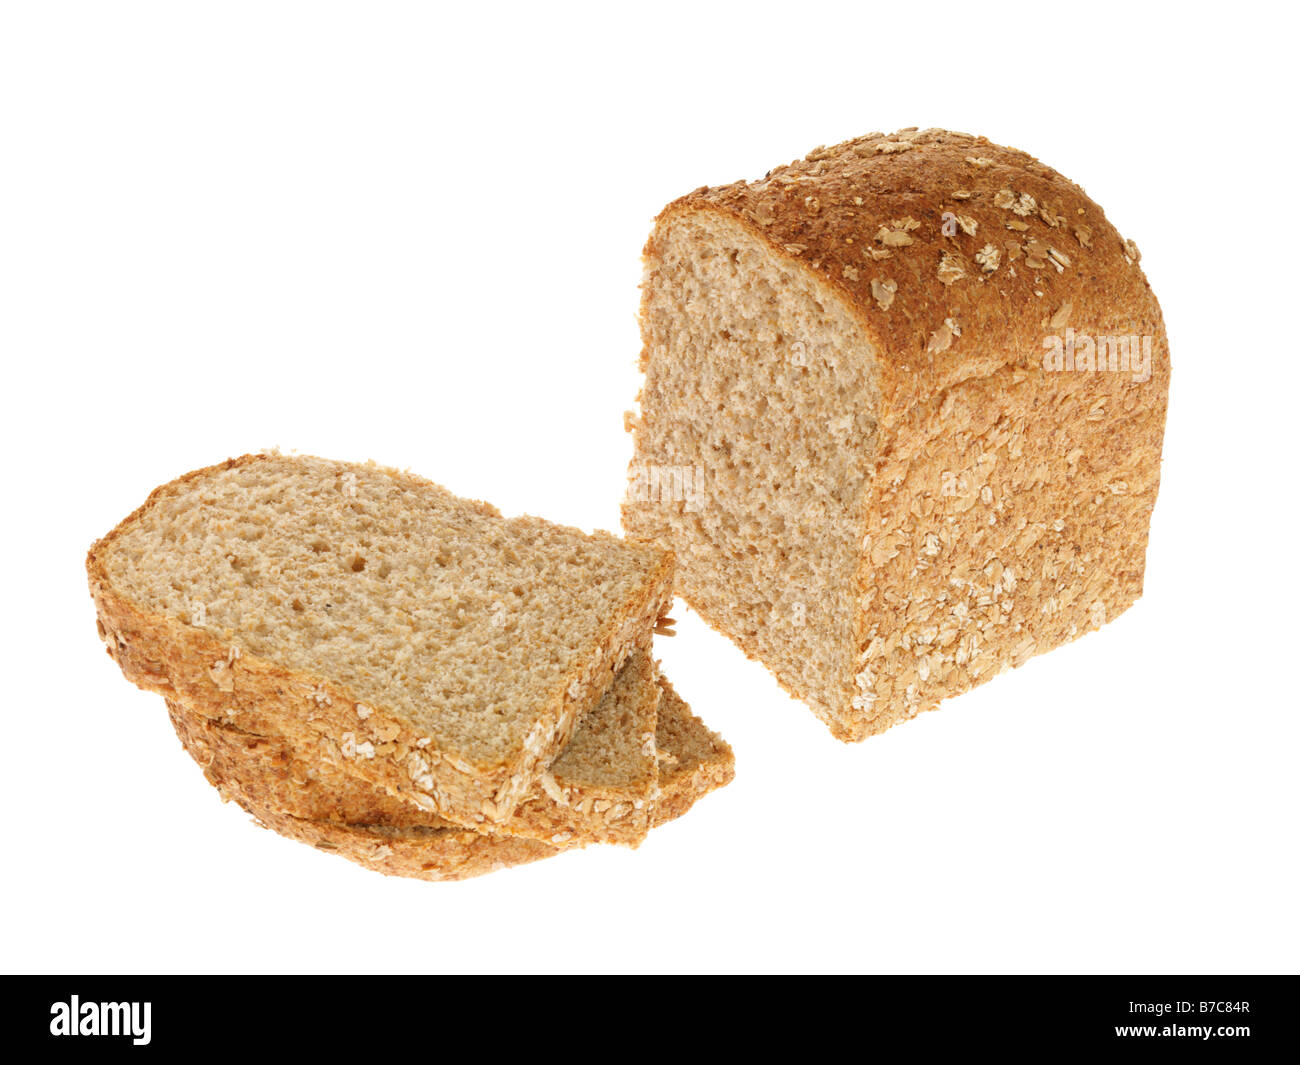 Loaf Of Brown Wholegrain Organic Bread Against A White Background With No People With Copy Space and a Clipping Path Stock Photo